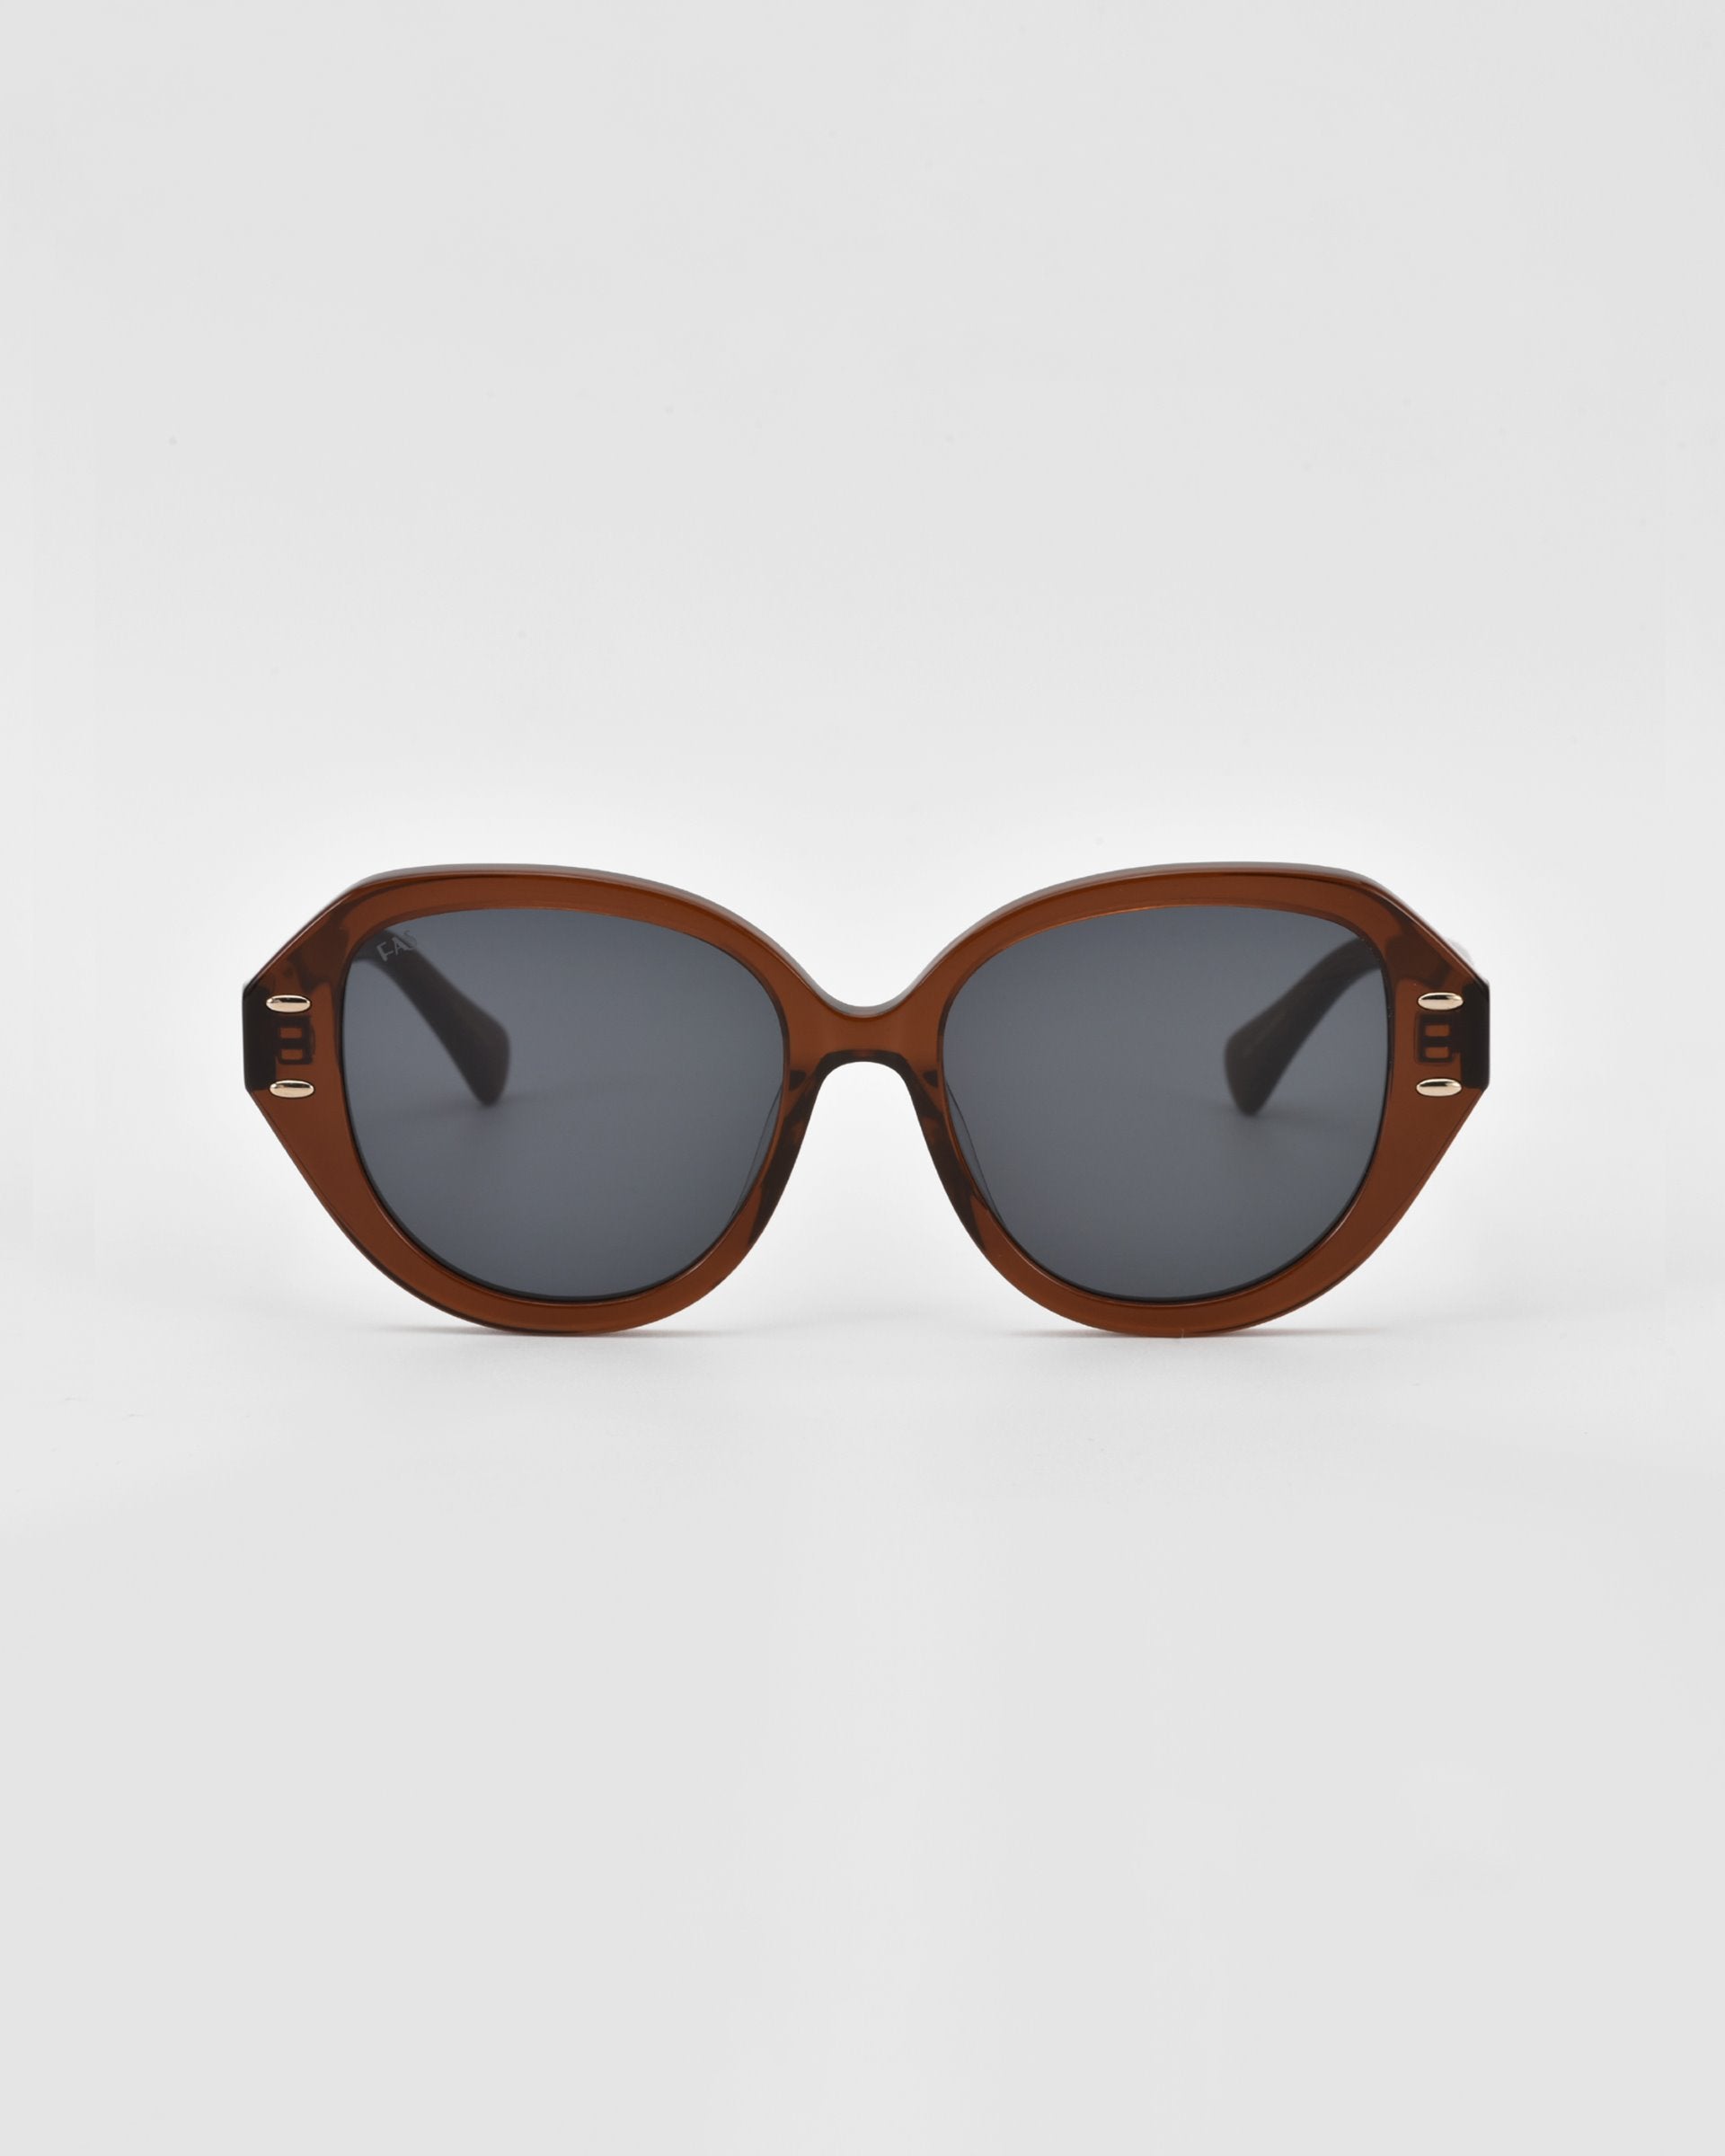 A pair of oversized, round, brown-framed Mirage sunglasses by For Art's Sake® with dark-tinted lenses. The frame, made from plant-based acetate, features a glossy finish. The Mirage sunglasses are set against a plain white background.